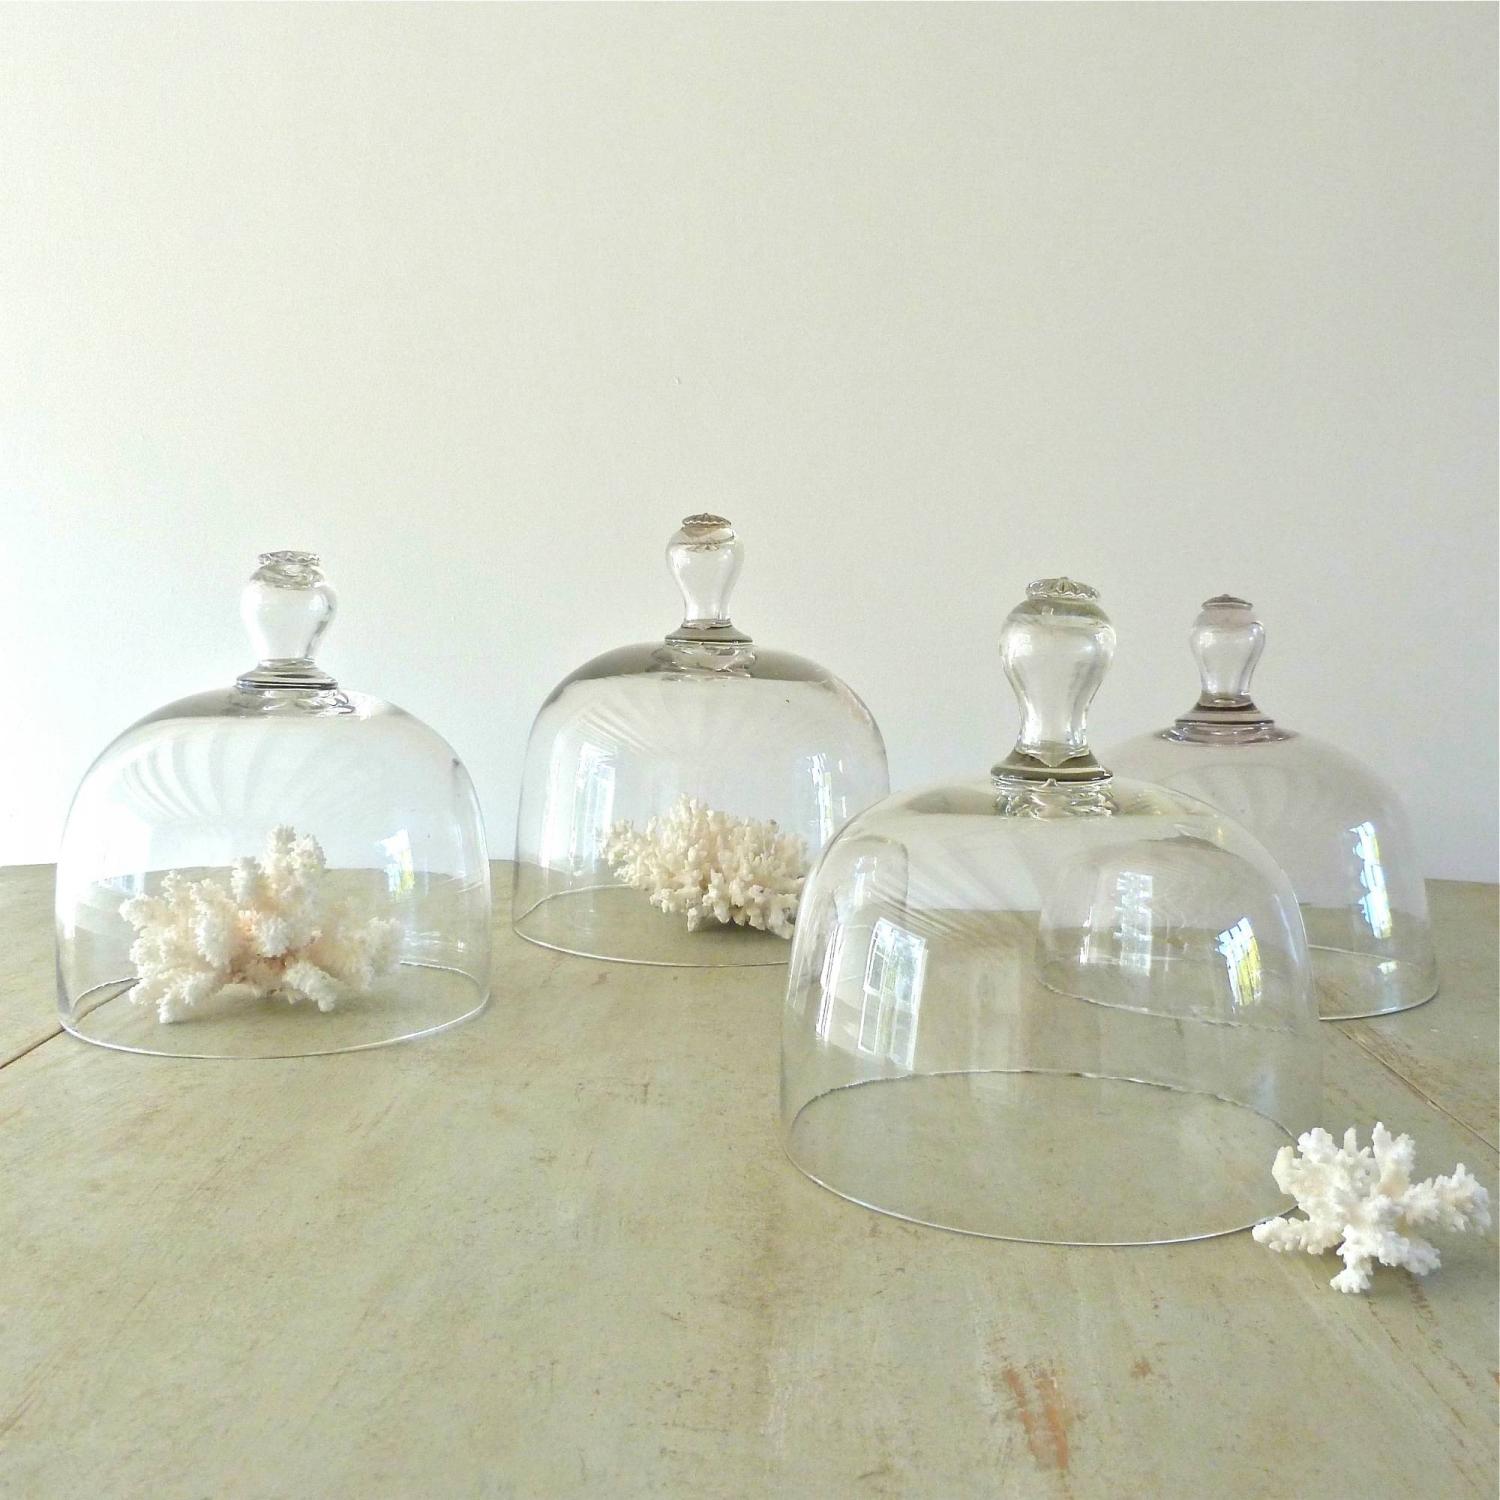 FINE COLLECTION OF FOUR LARGE 19TH CENTURY CLOCHES